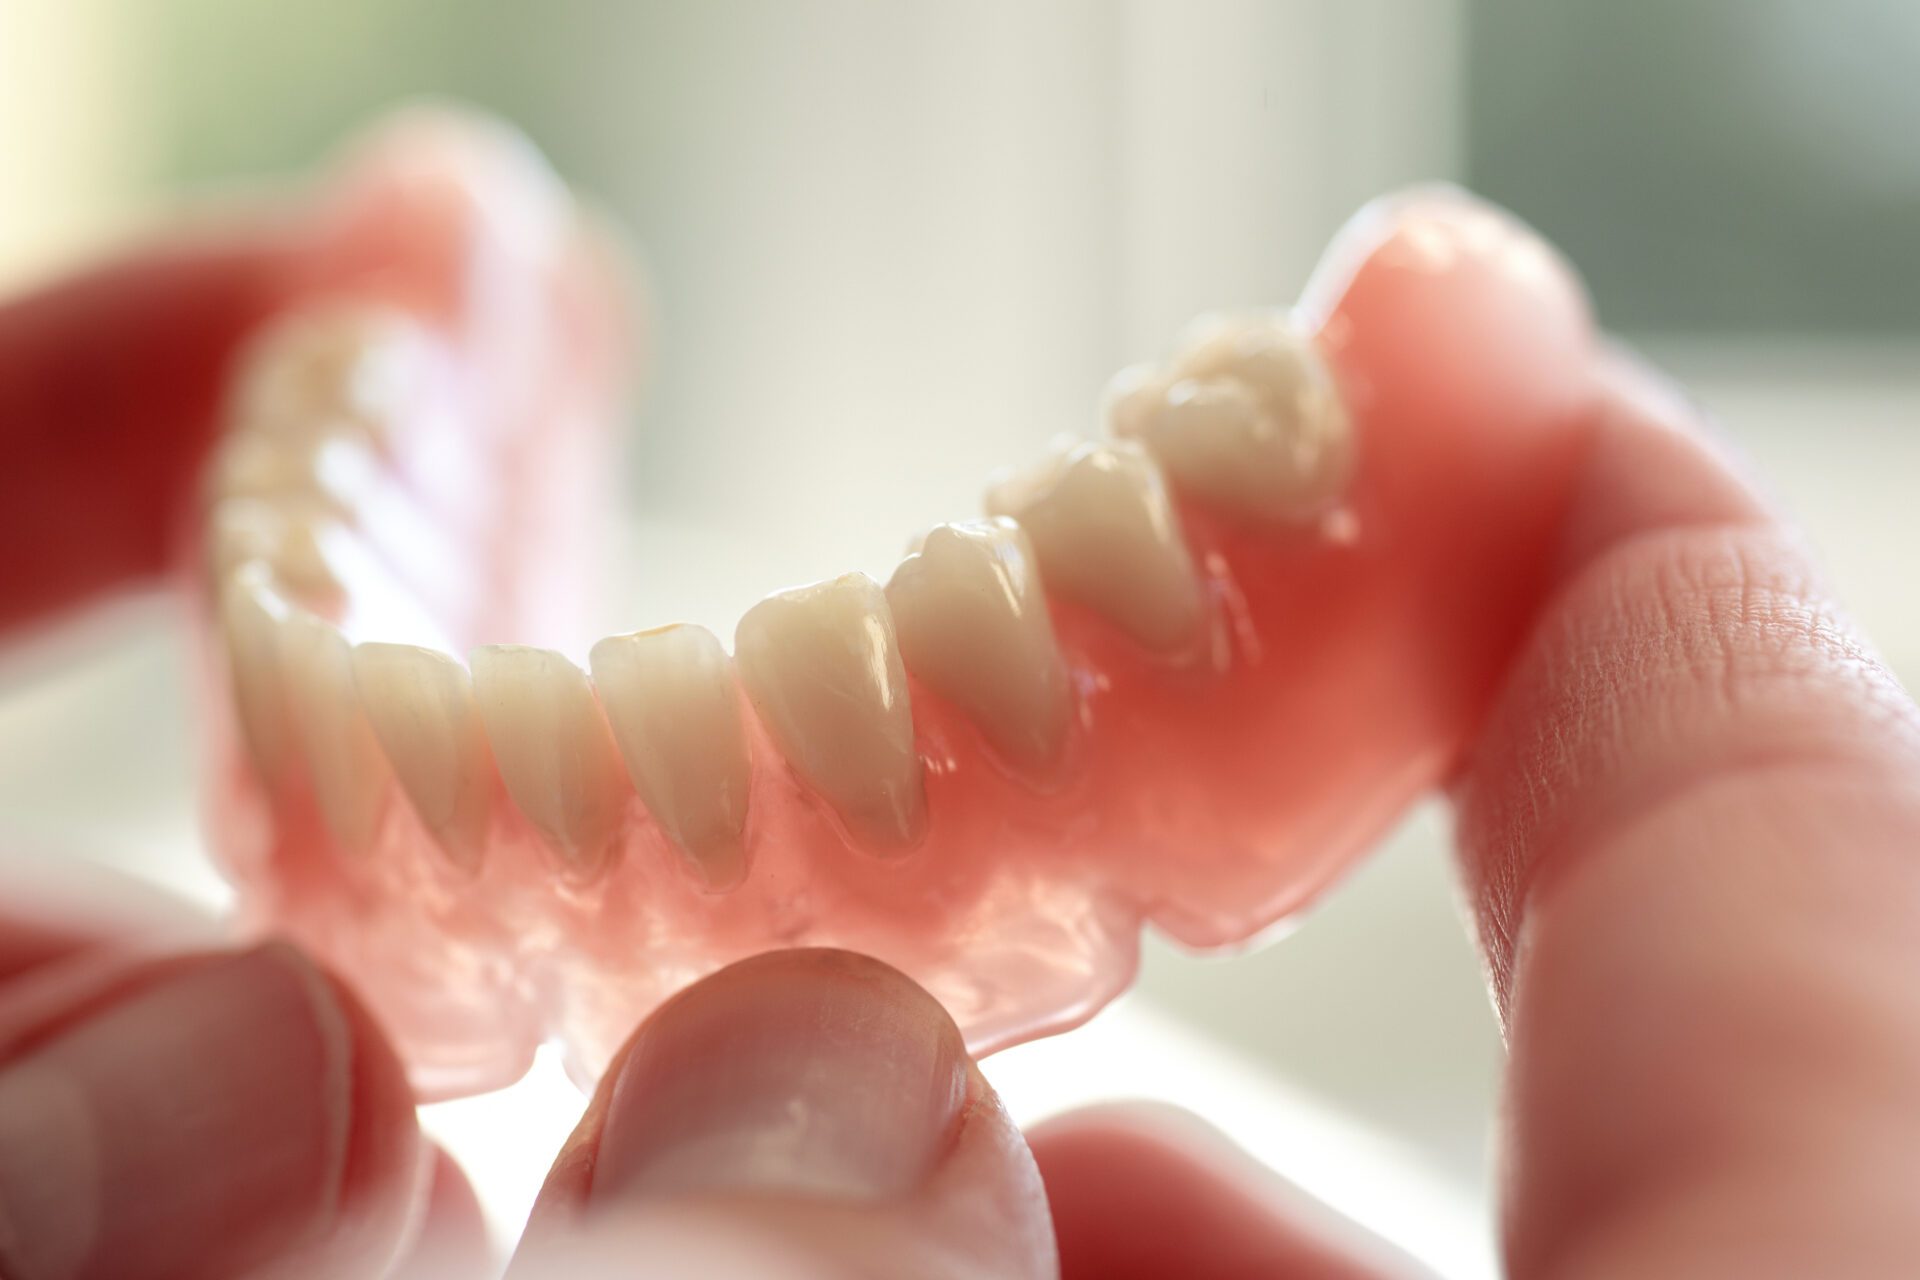 Dental Implants in Bradenton, FL: A Path to Improved Quality of Life